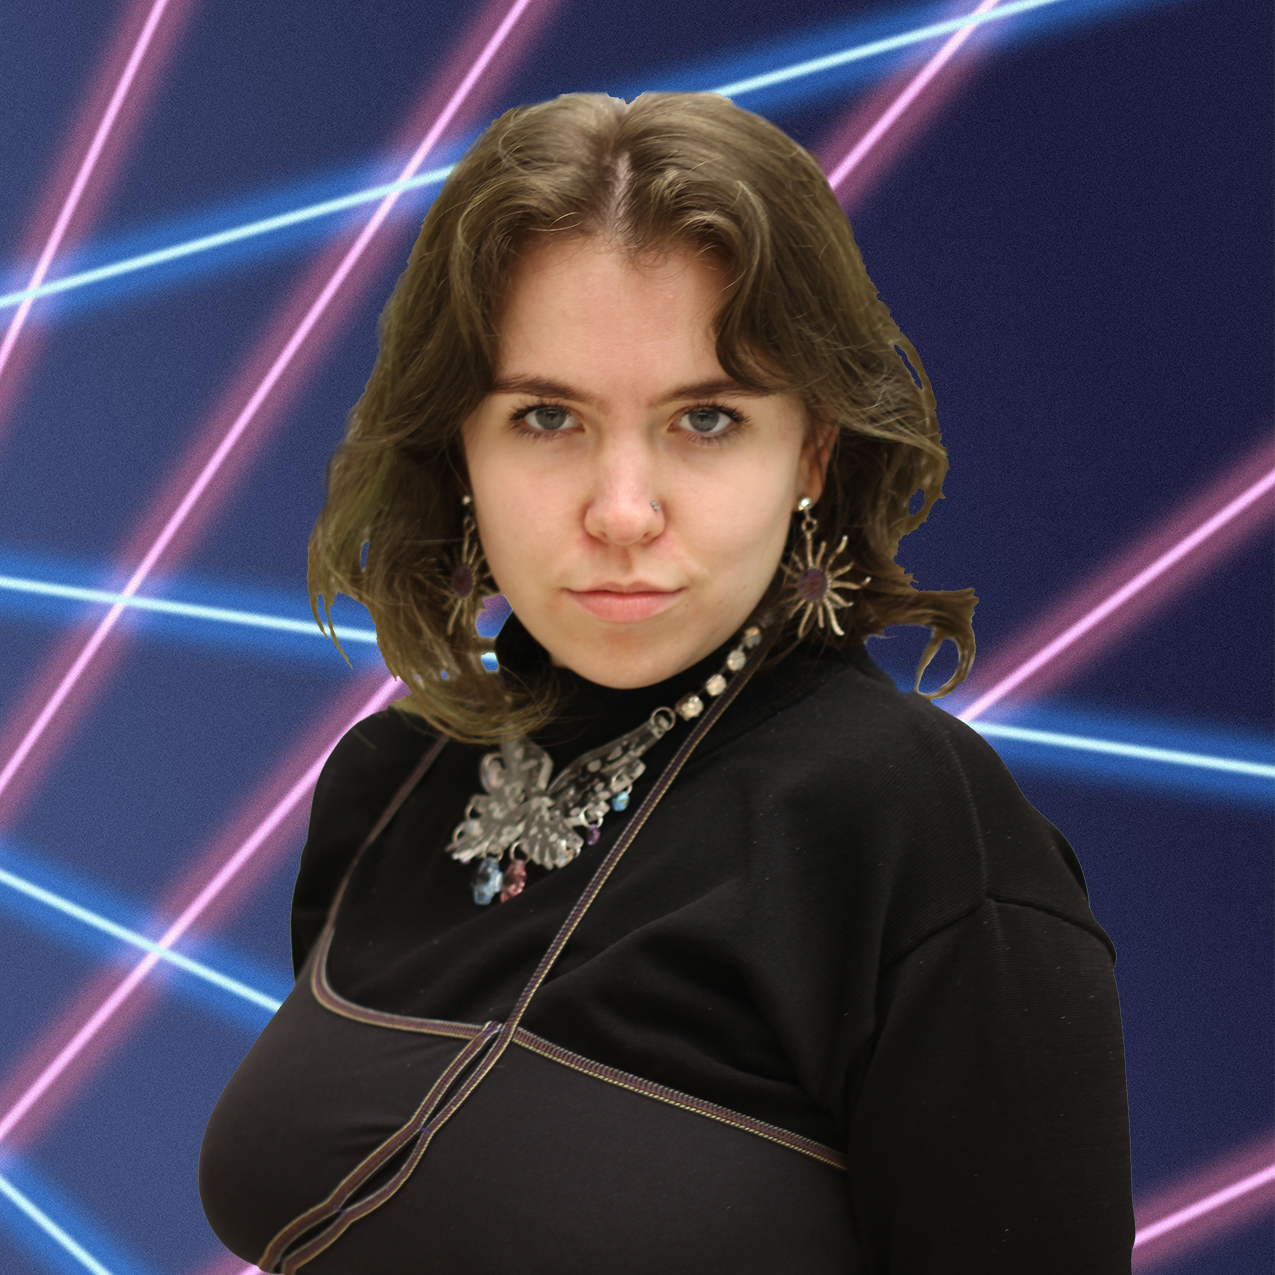 Gail in front of laser background